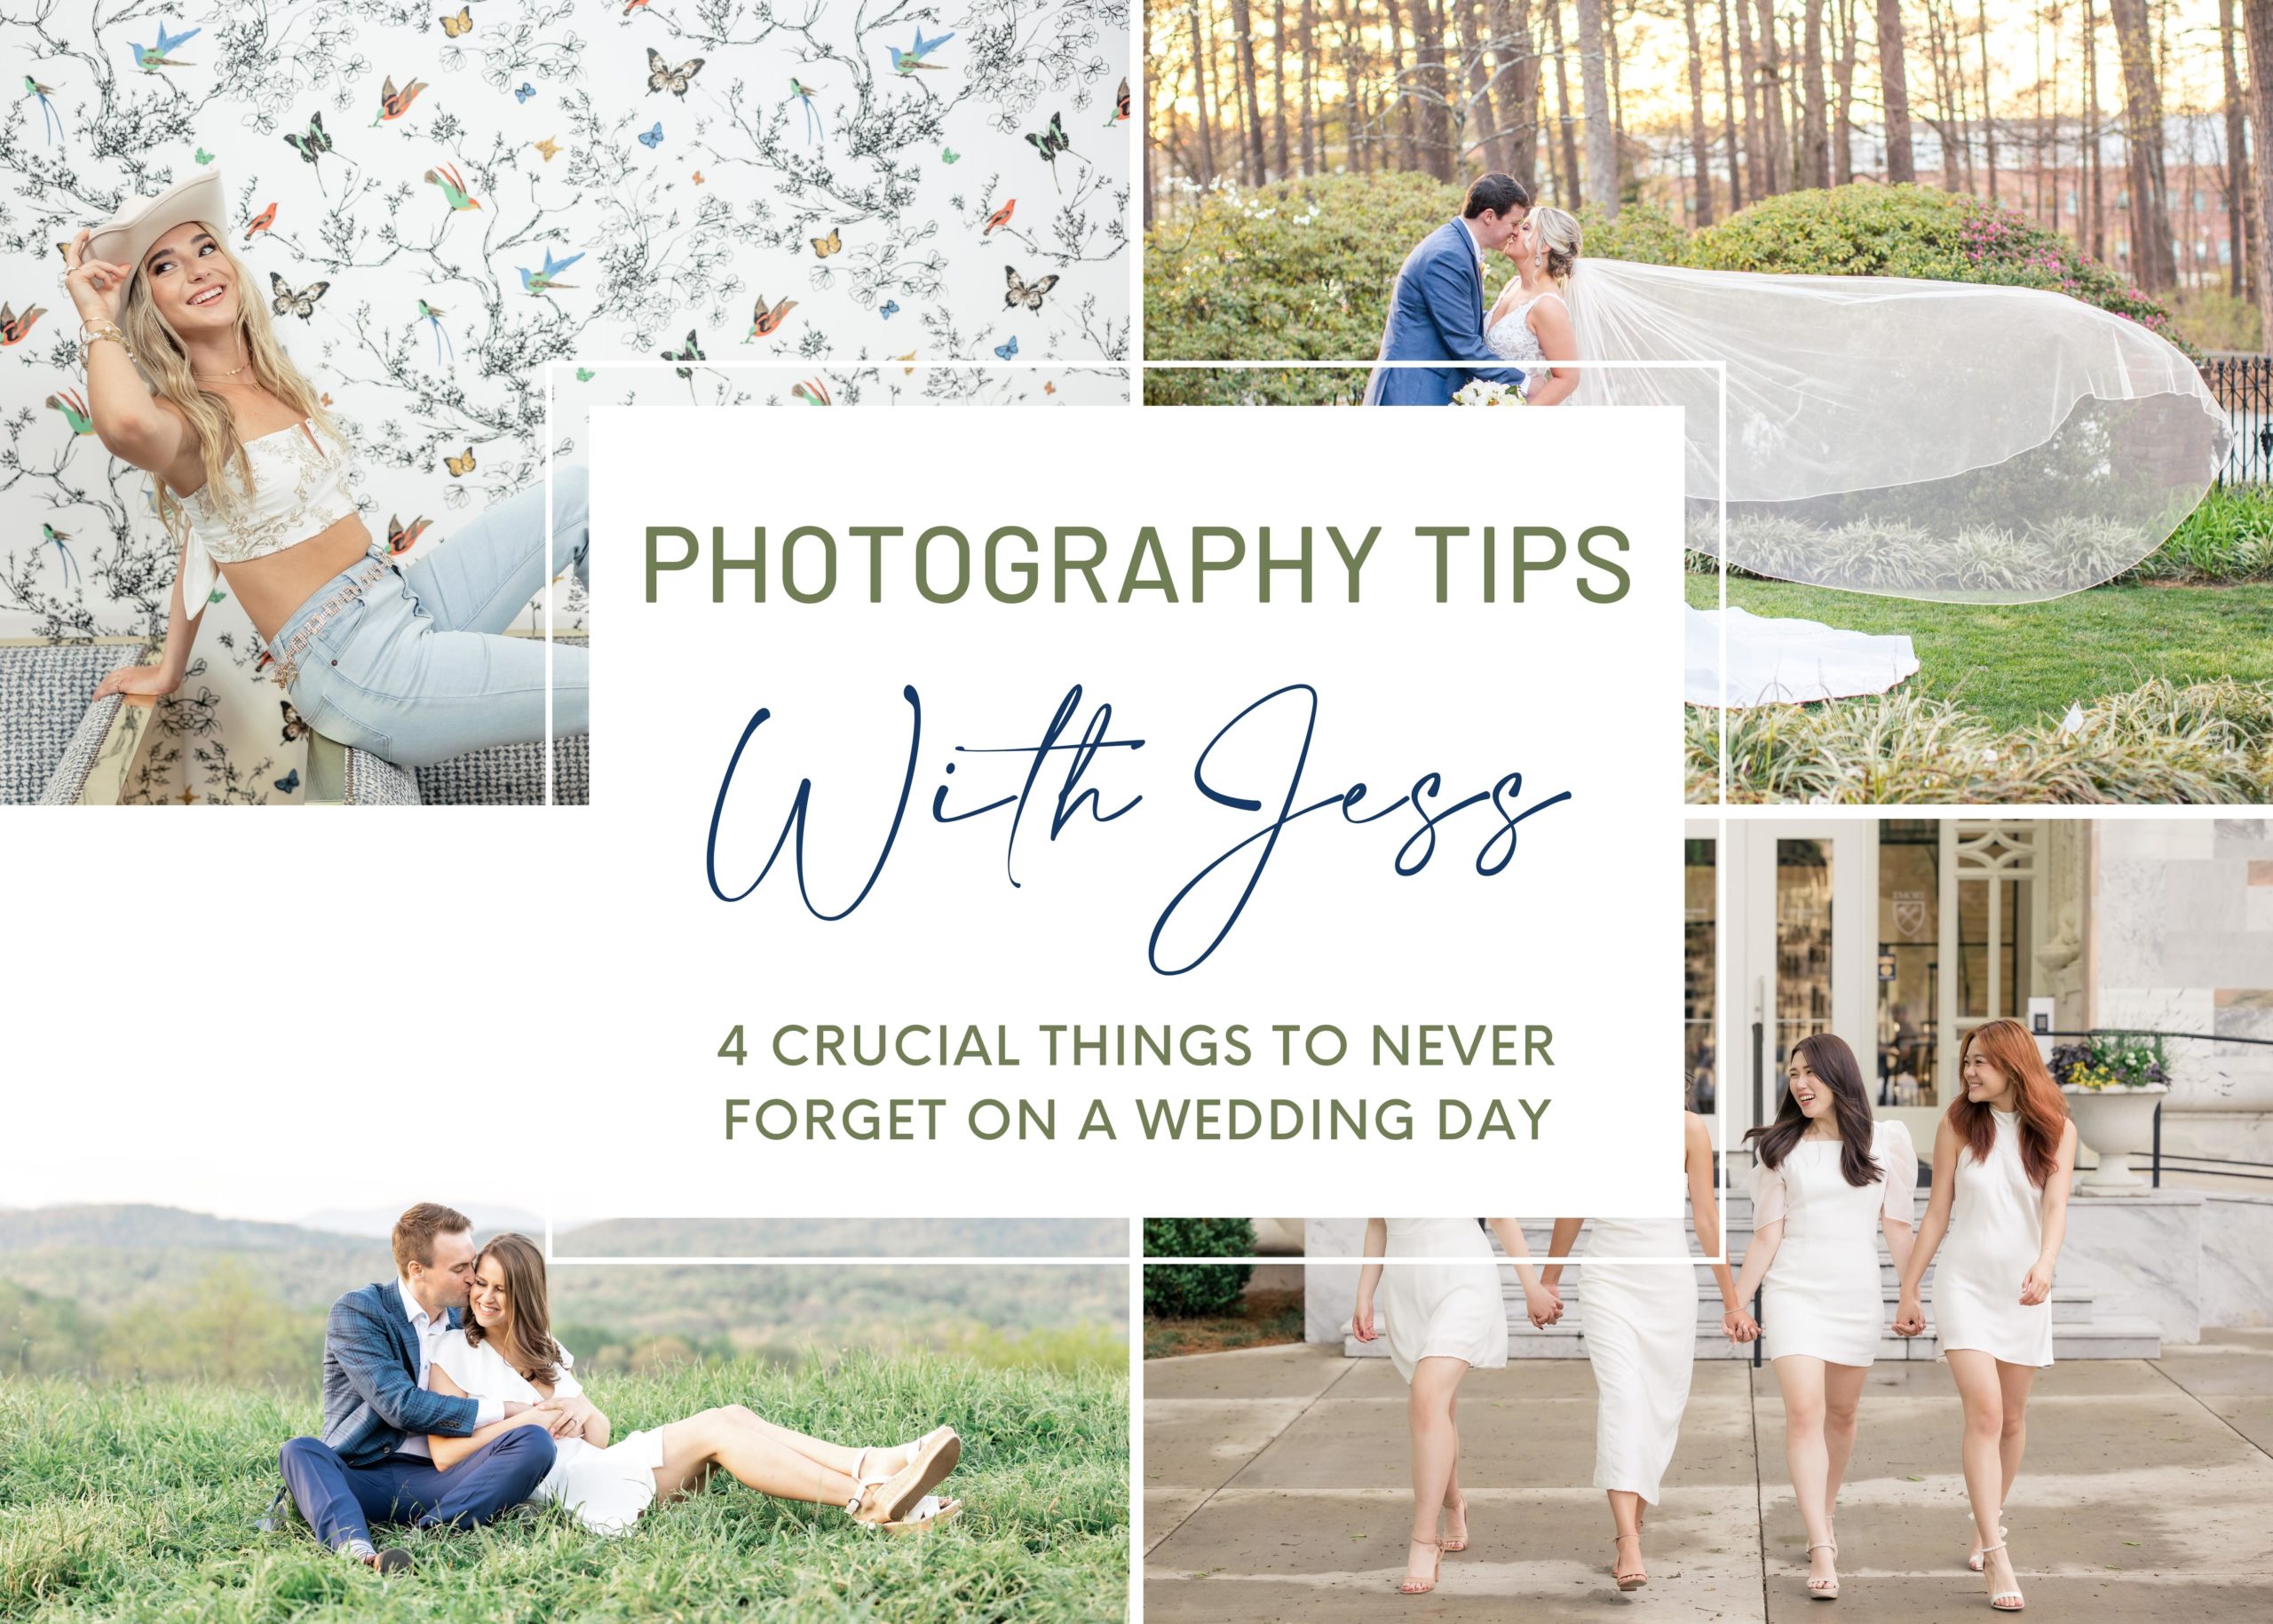 Photography Tips, 4 crucial Items to never forget when shooting weddings